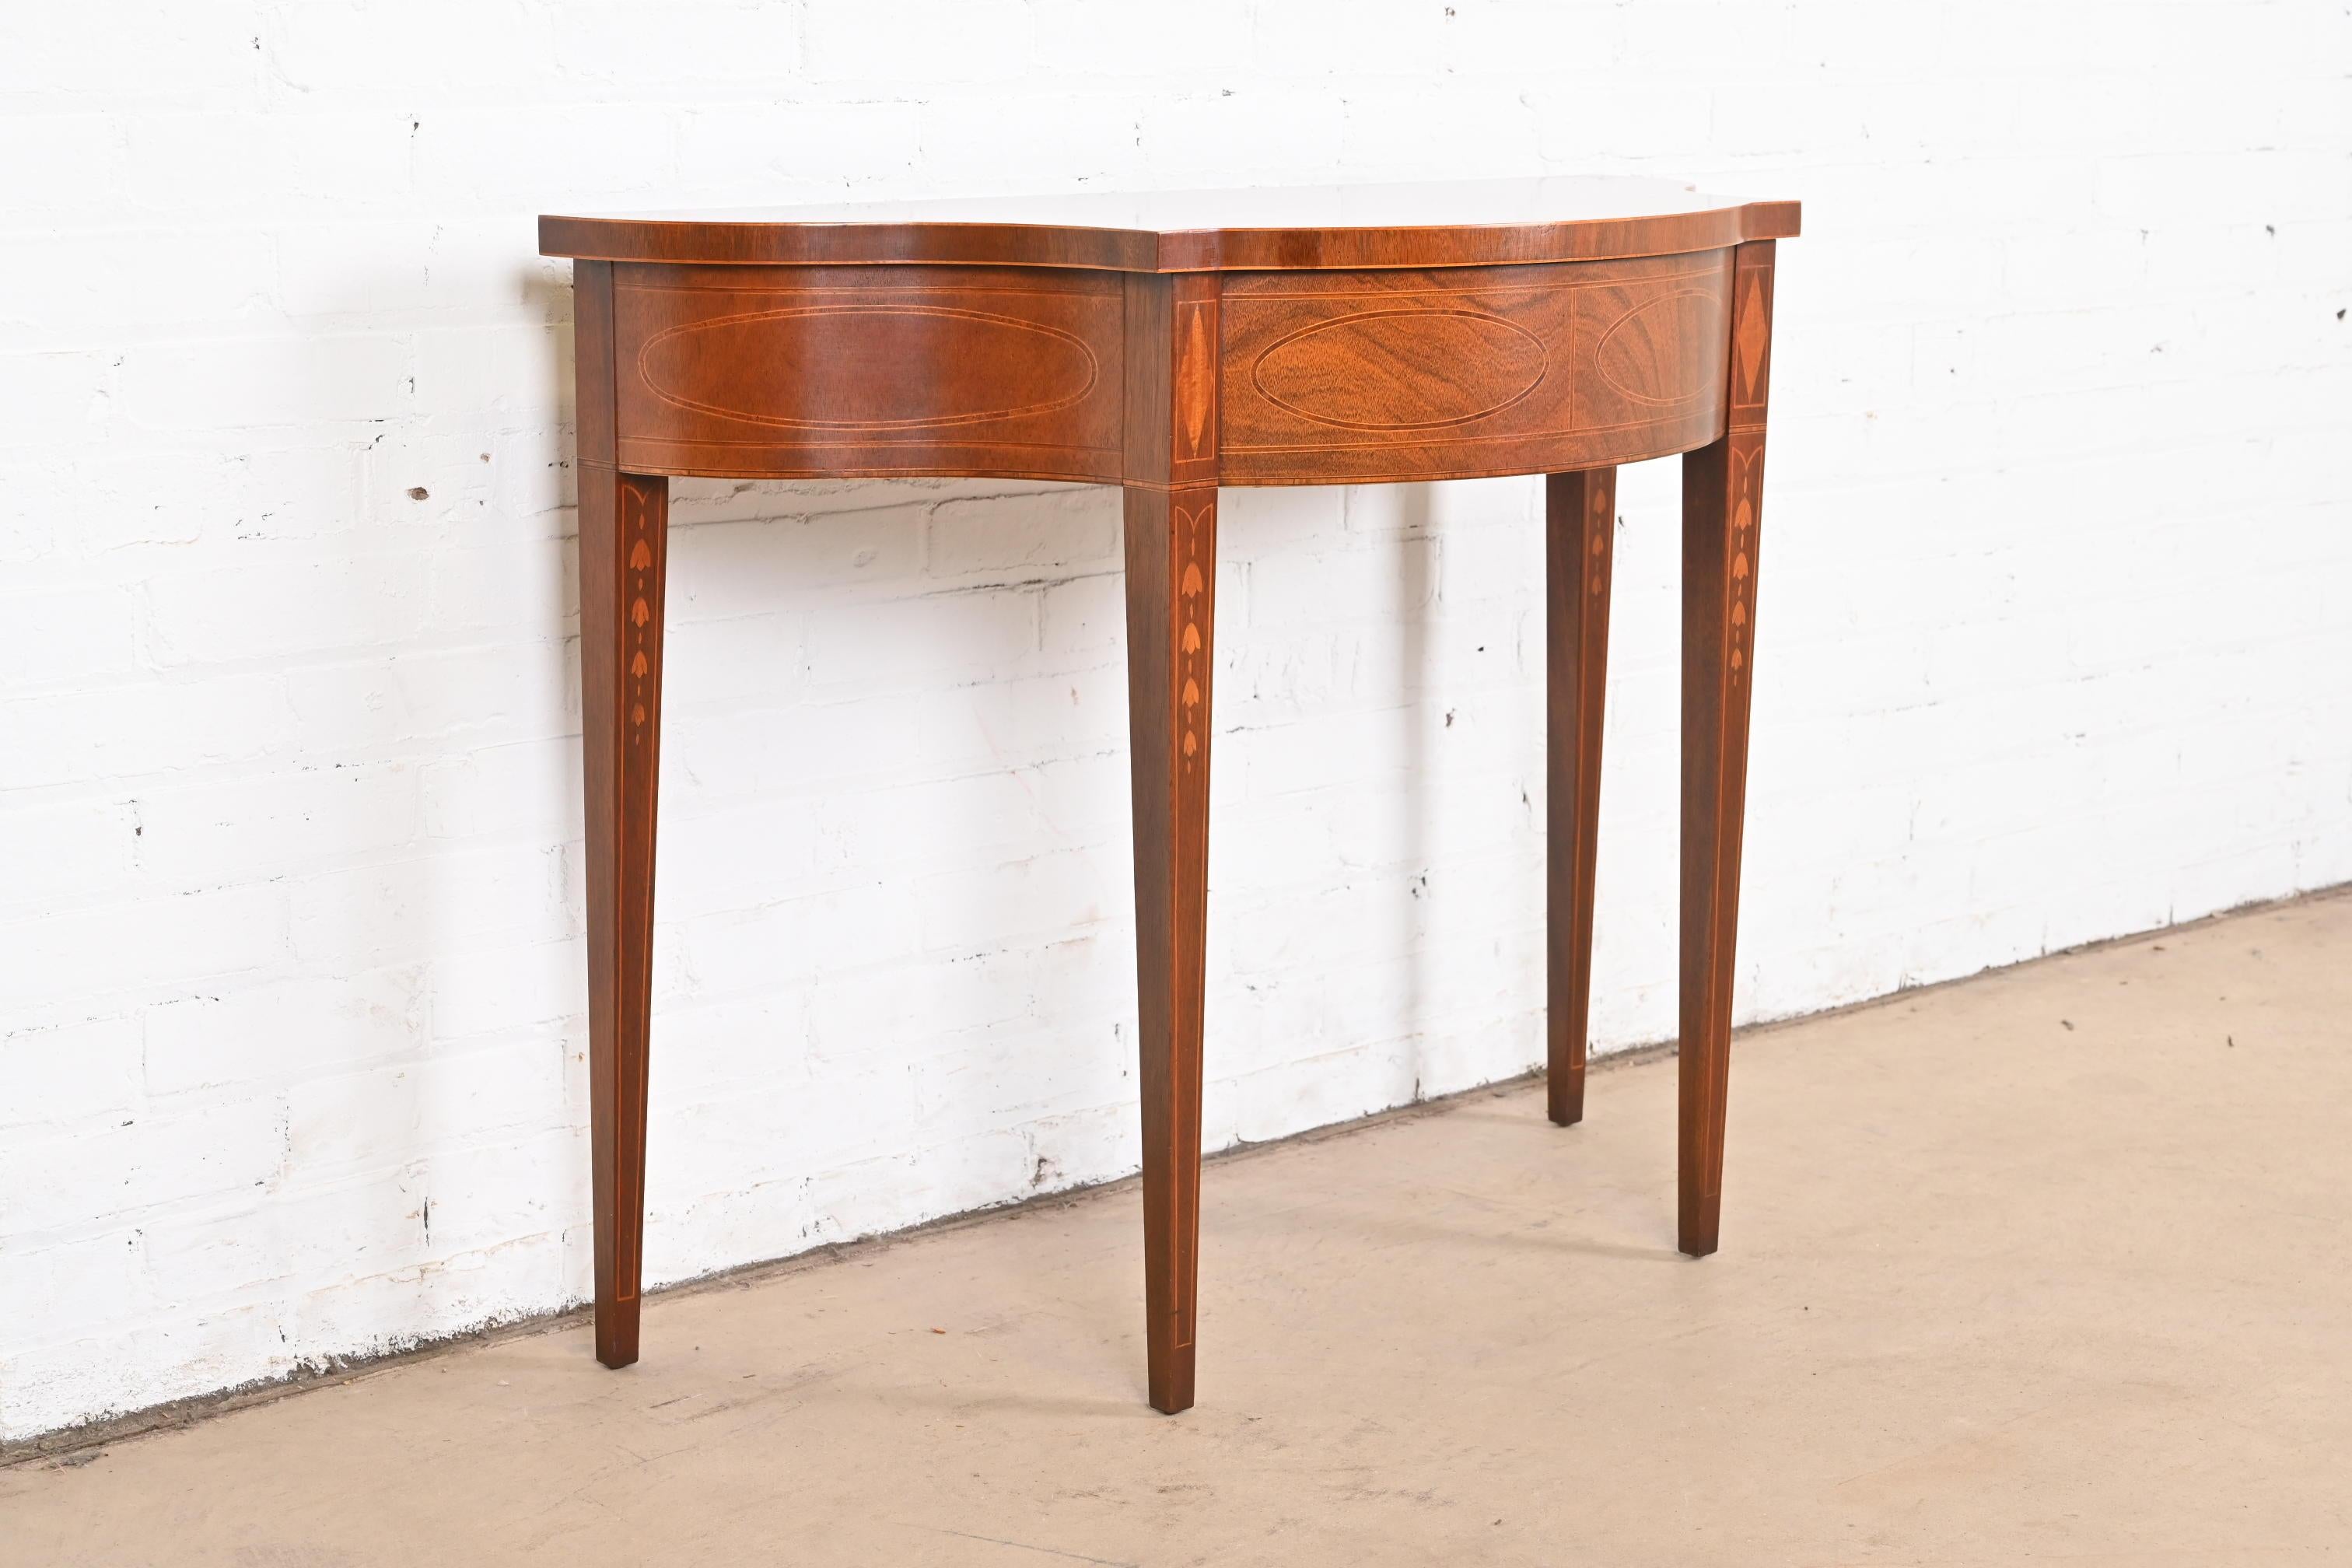 Baker Furniture Historic Charleston Federal Inlaid Mahogany Console Table For Sale 2